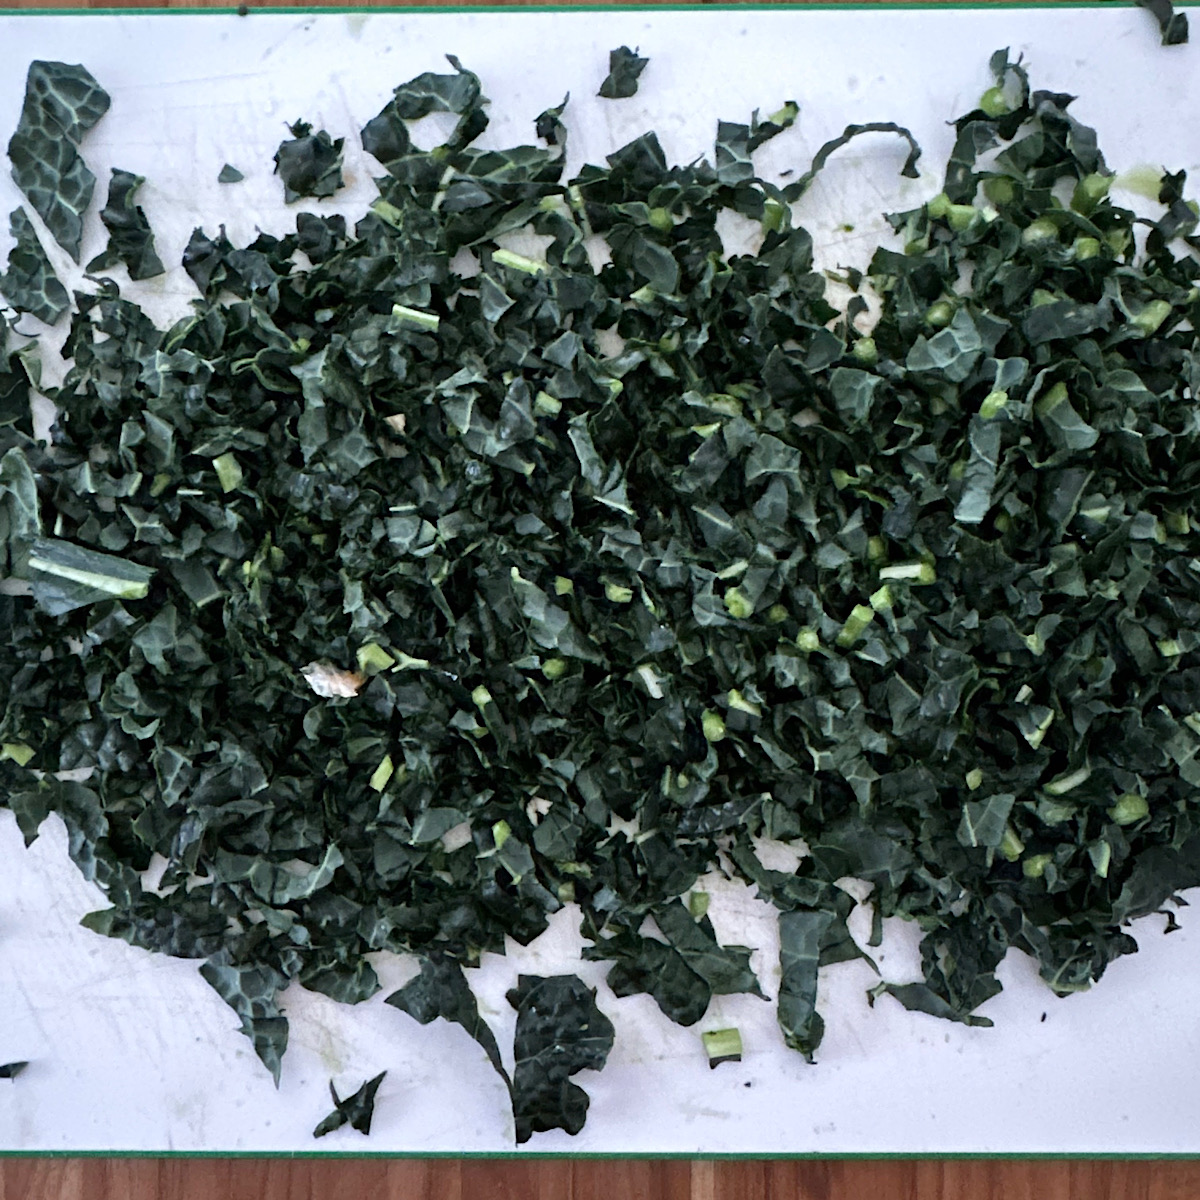 Finely chopped kale on white cutting board.